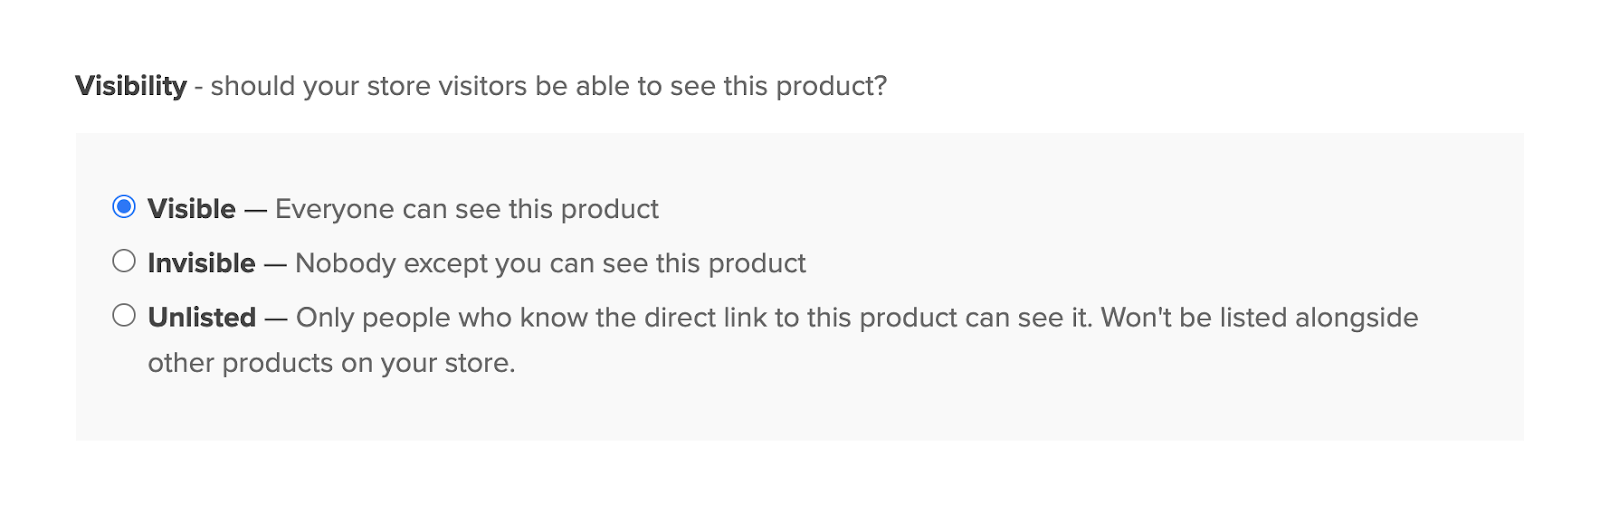 The "Visibility" section for a product on Payhip